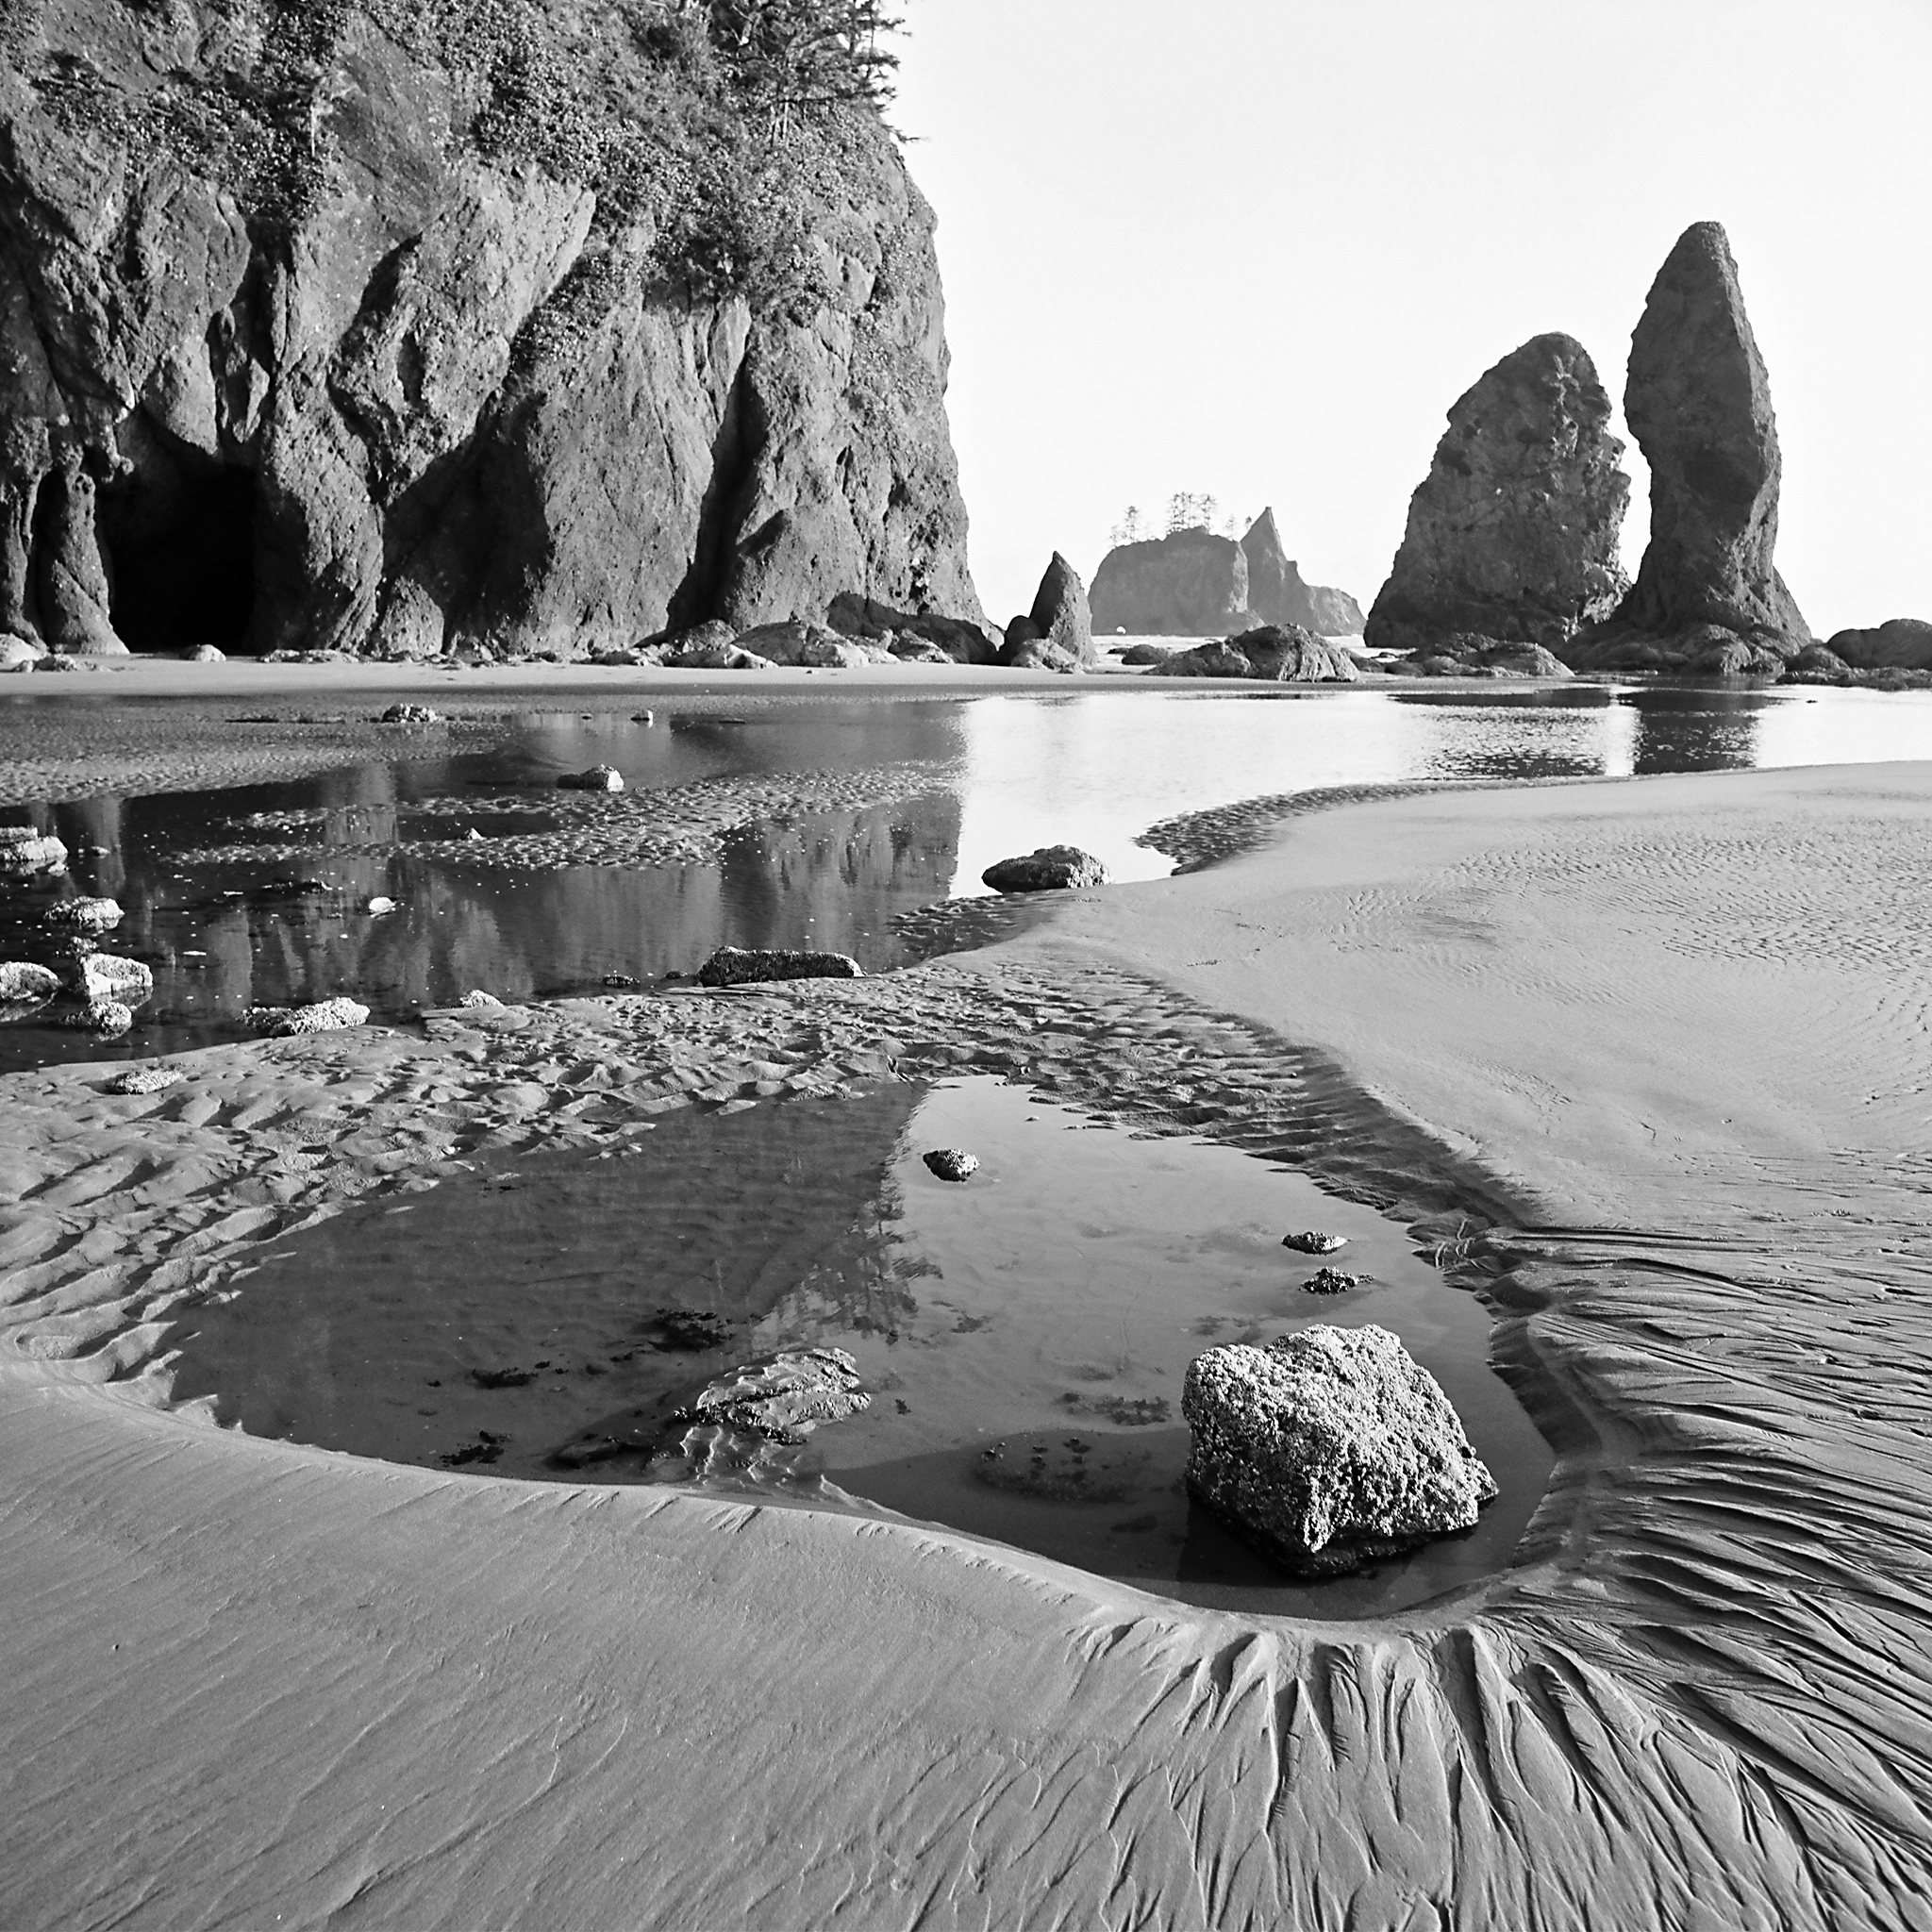  Point of Arches, Olympic National Park, Washington © 2009.  Image: Hasselblad 500 C/M + Zeiss Distagon CF T* 1:4/50mm. 